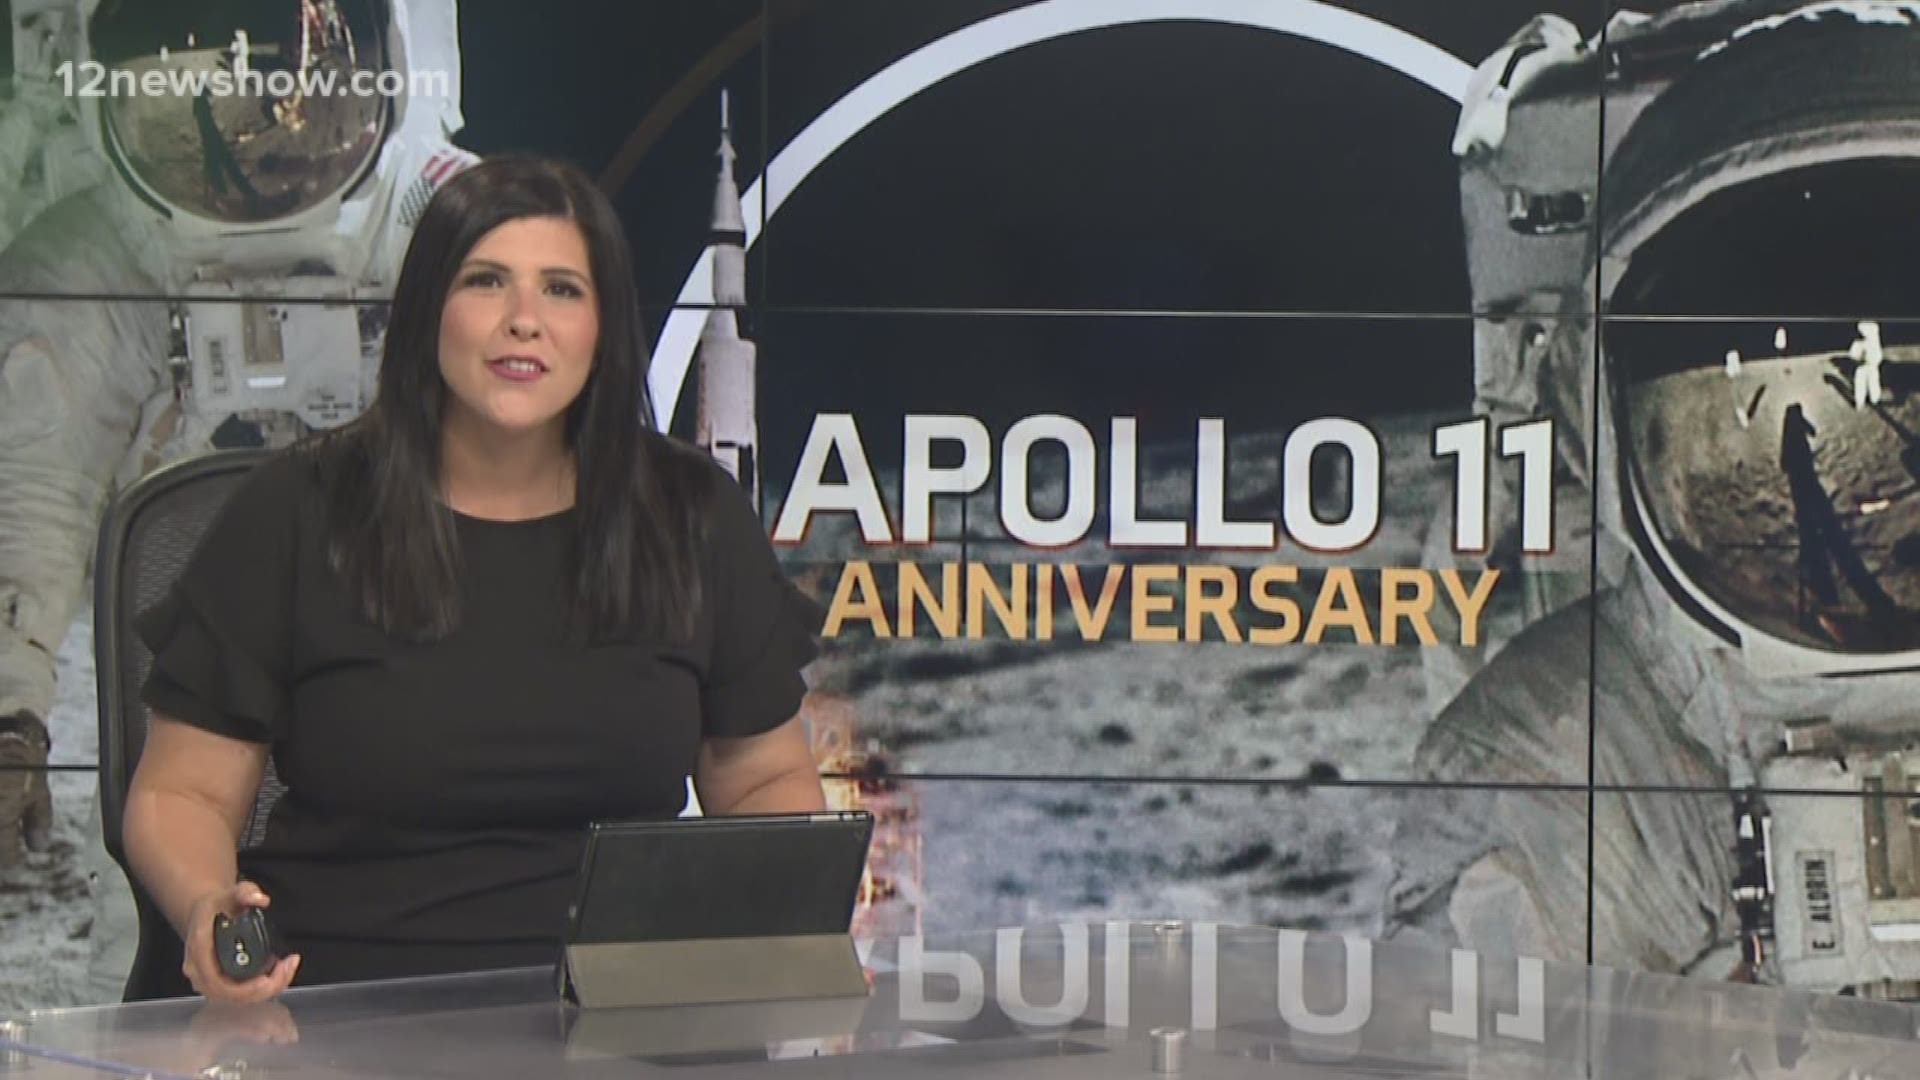 Celebrations are going on across the country to mark the 50th anniversary of the Apollo 11 mission, when Neil Armstrong became the first man to walk on the moon.